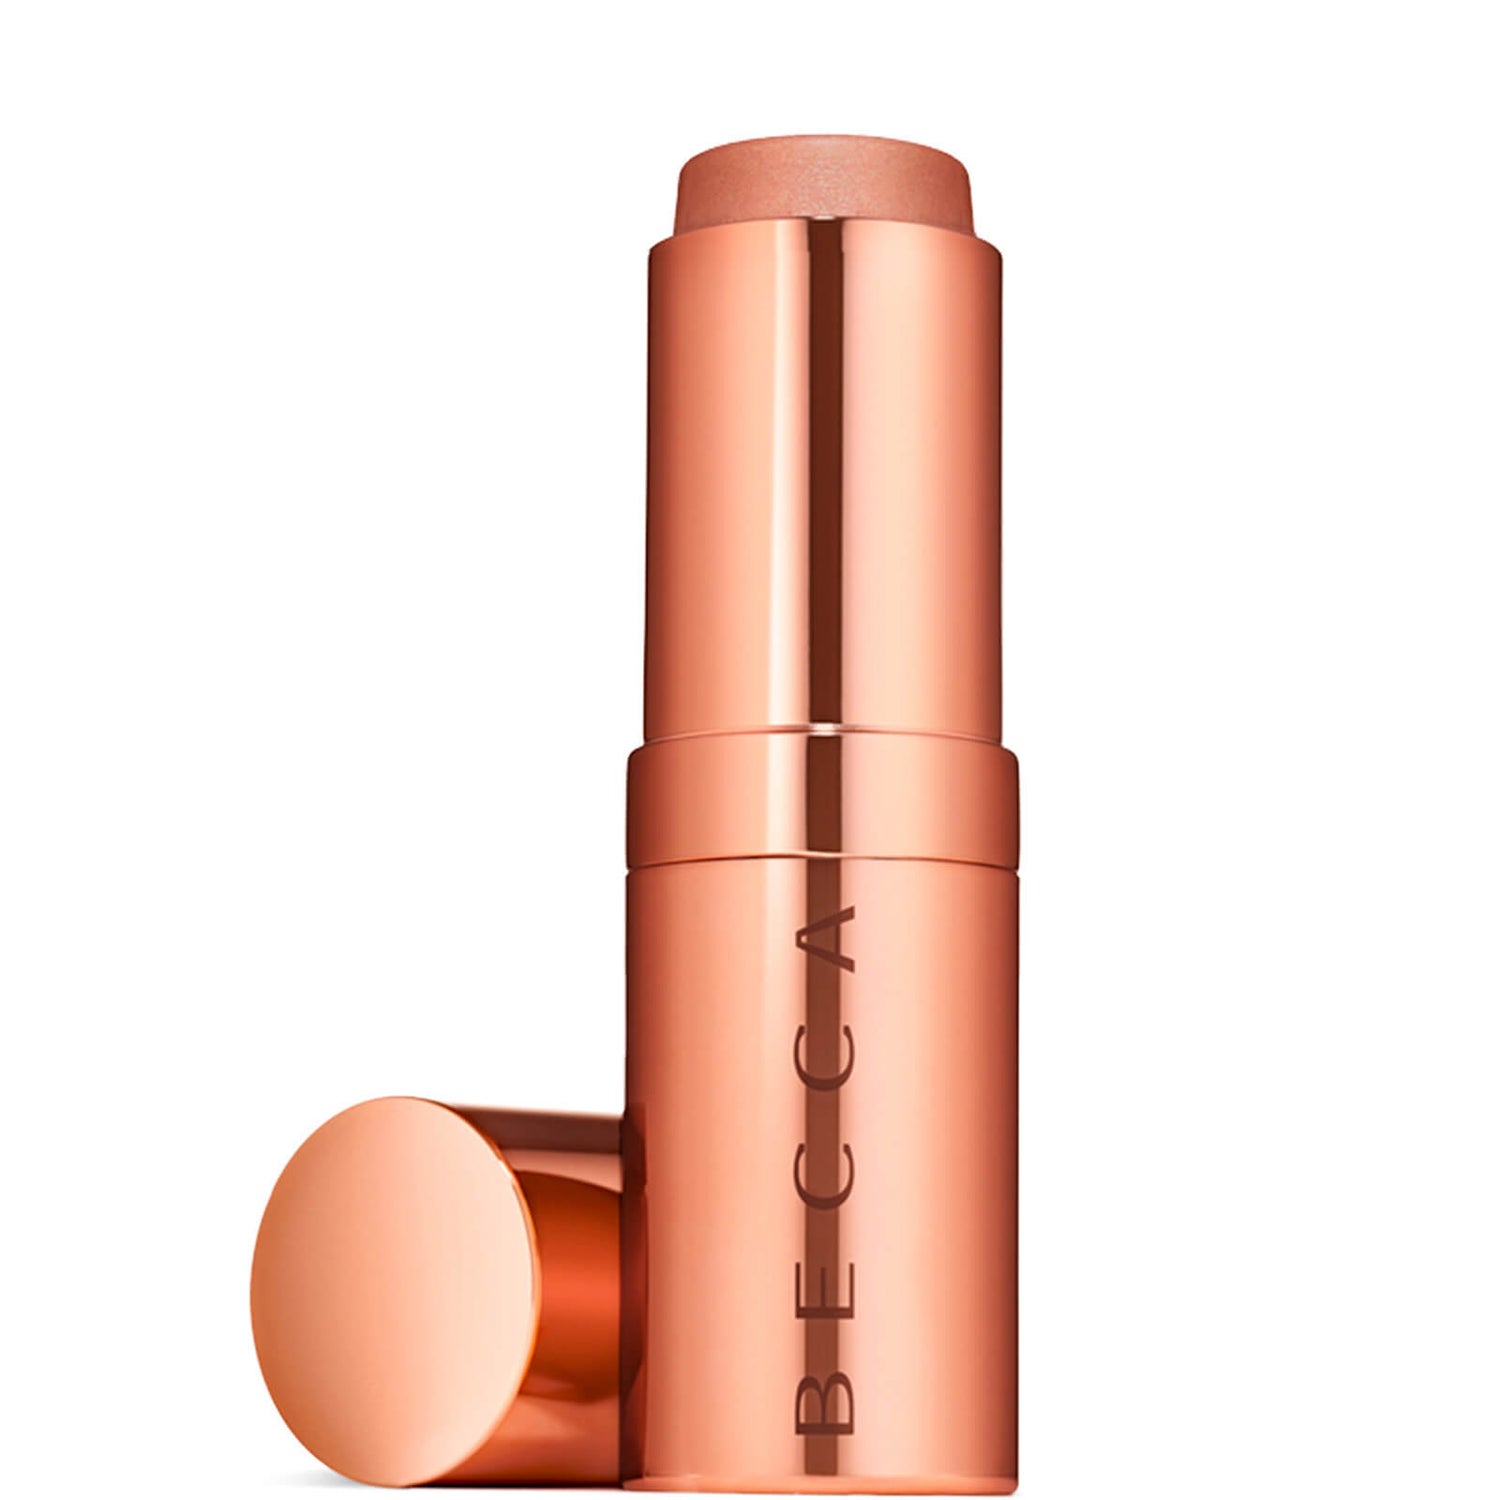 BECCA Collector's Edition Glow Body Stick - Champagne Pop (1.48 oz.)